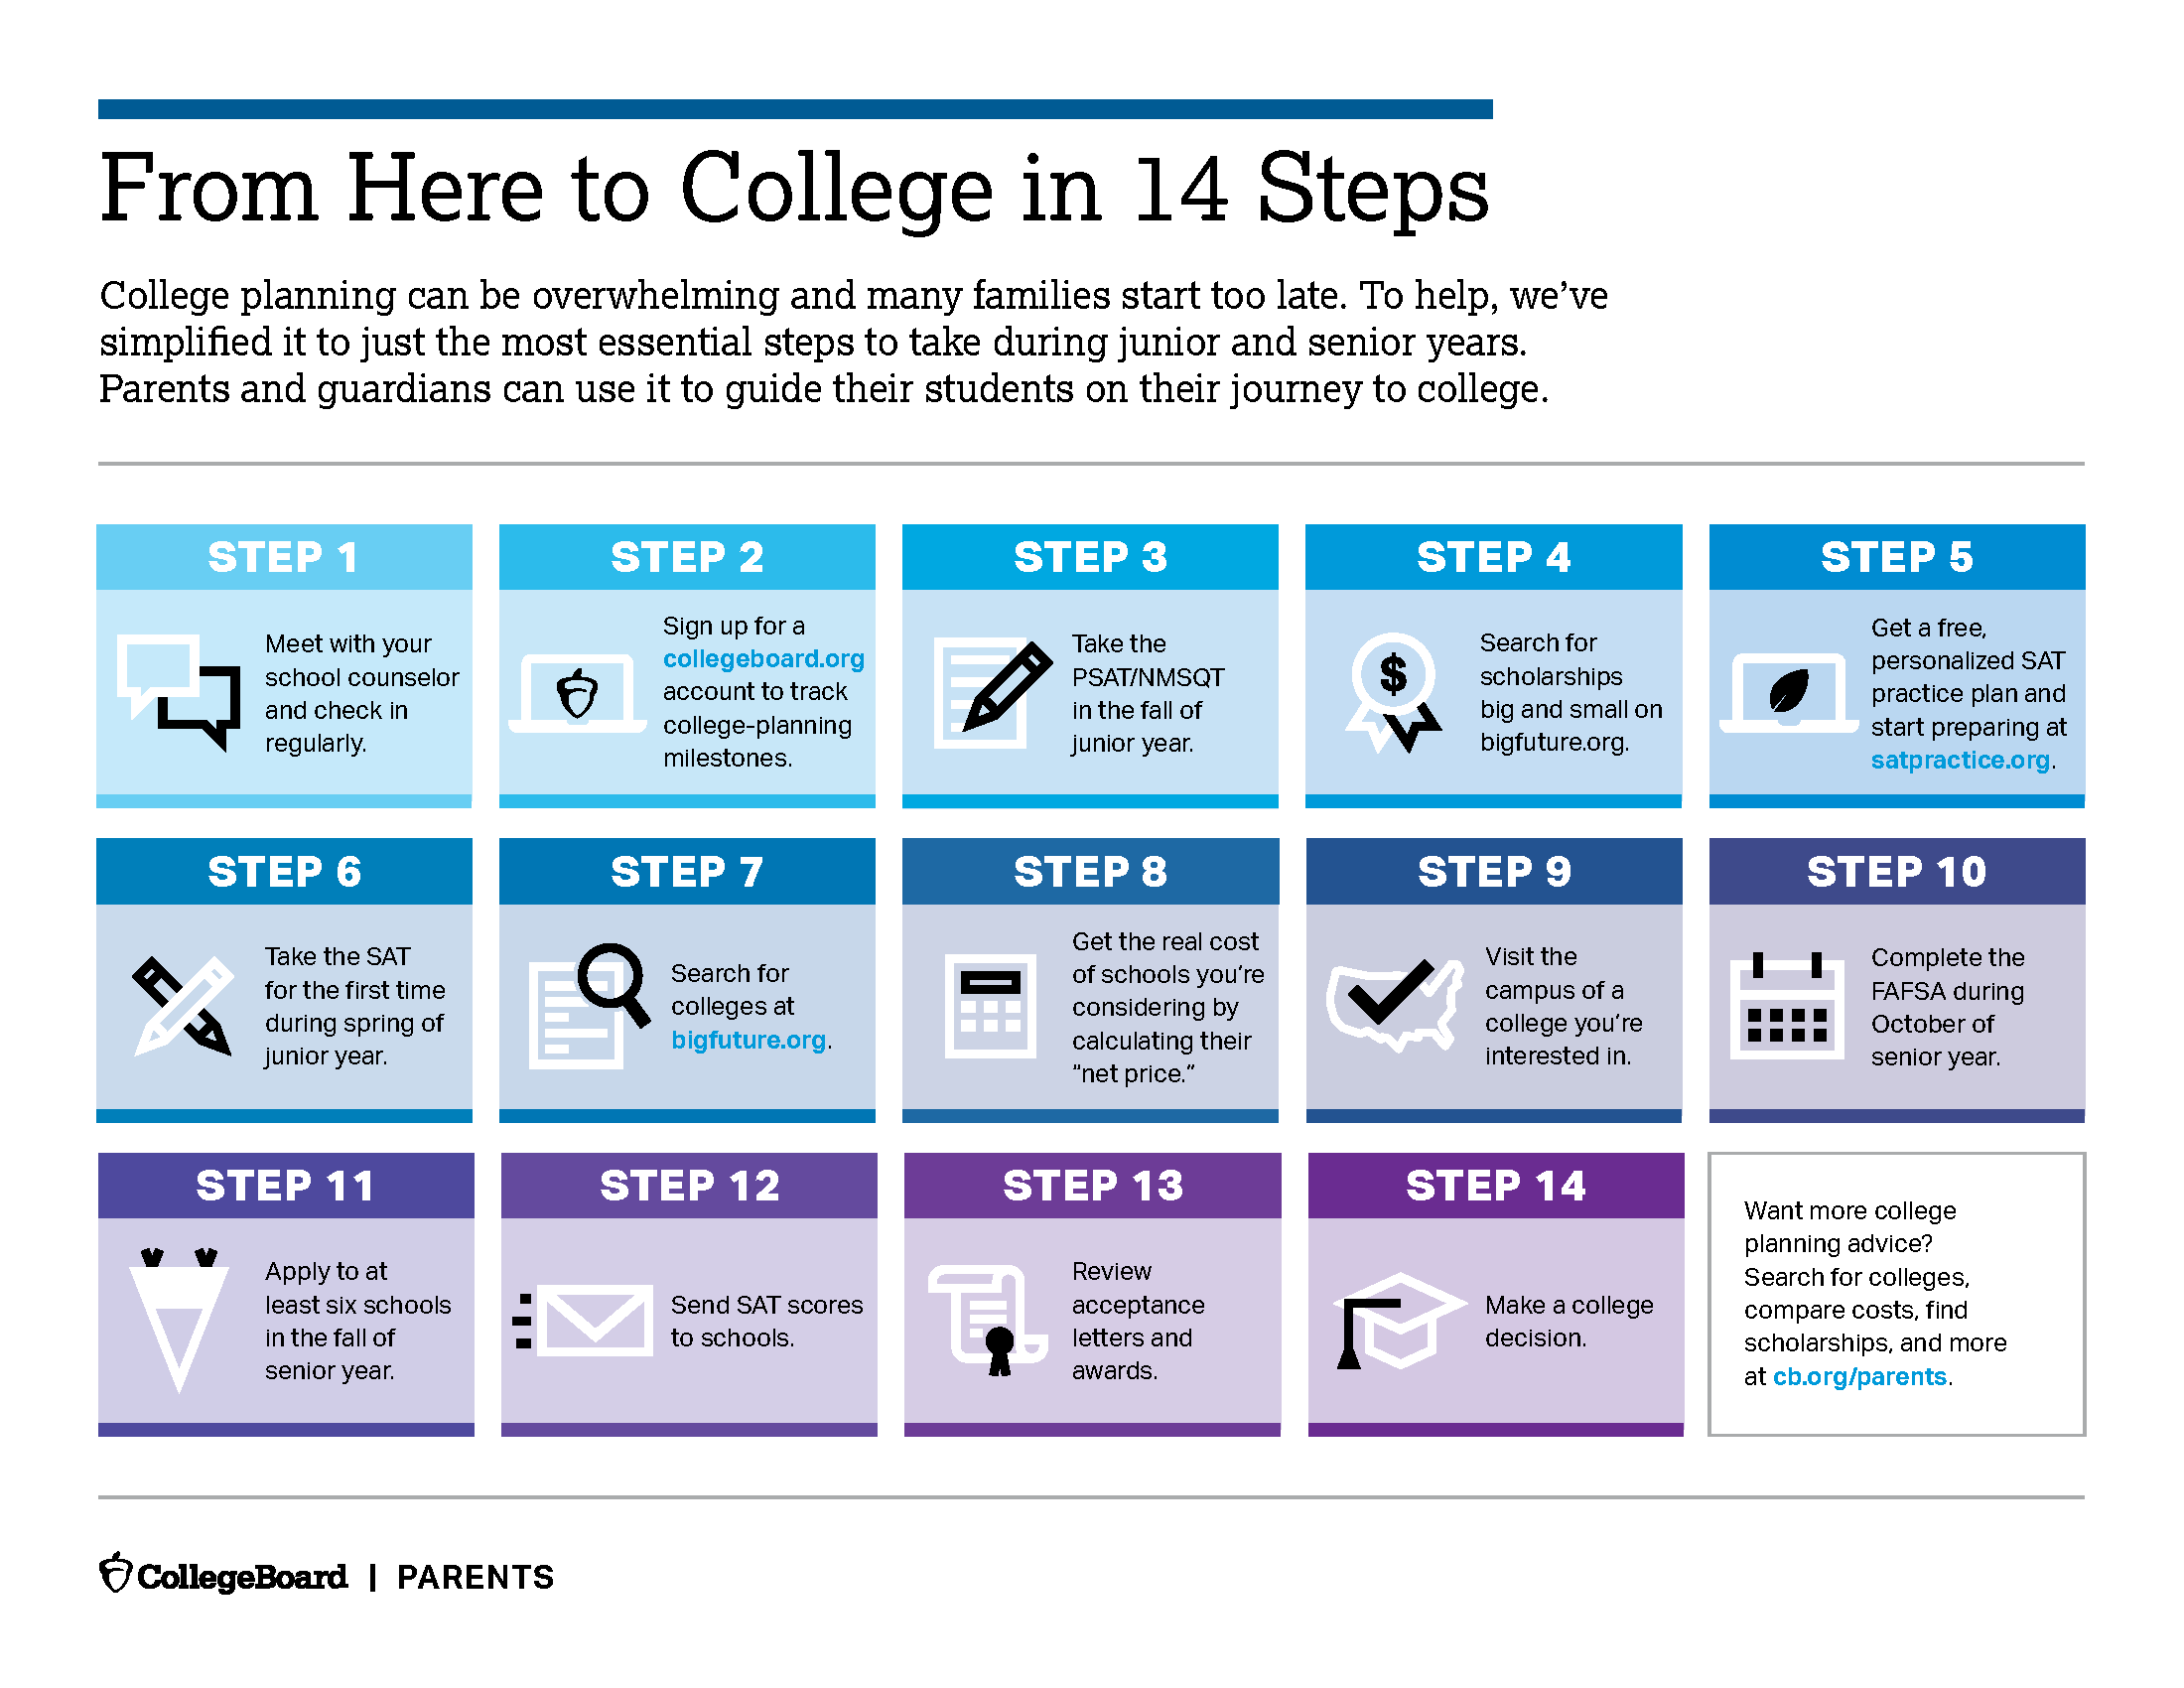 From here to college in 14 steps